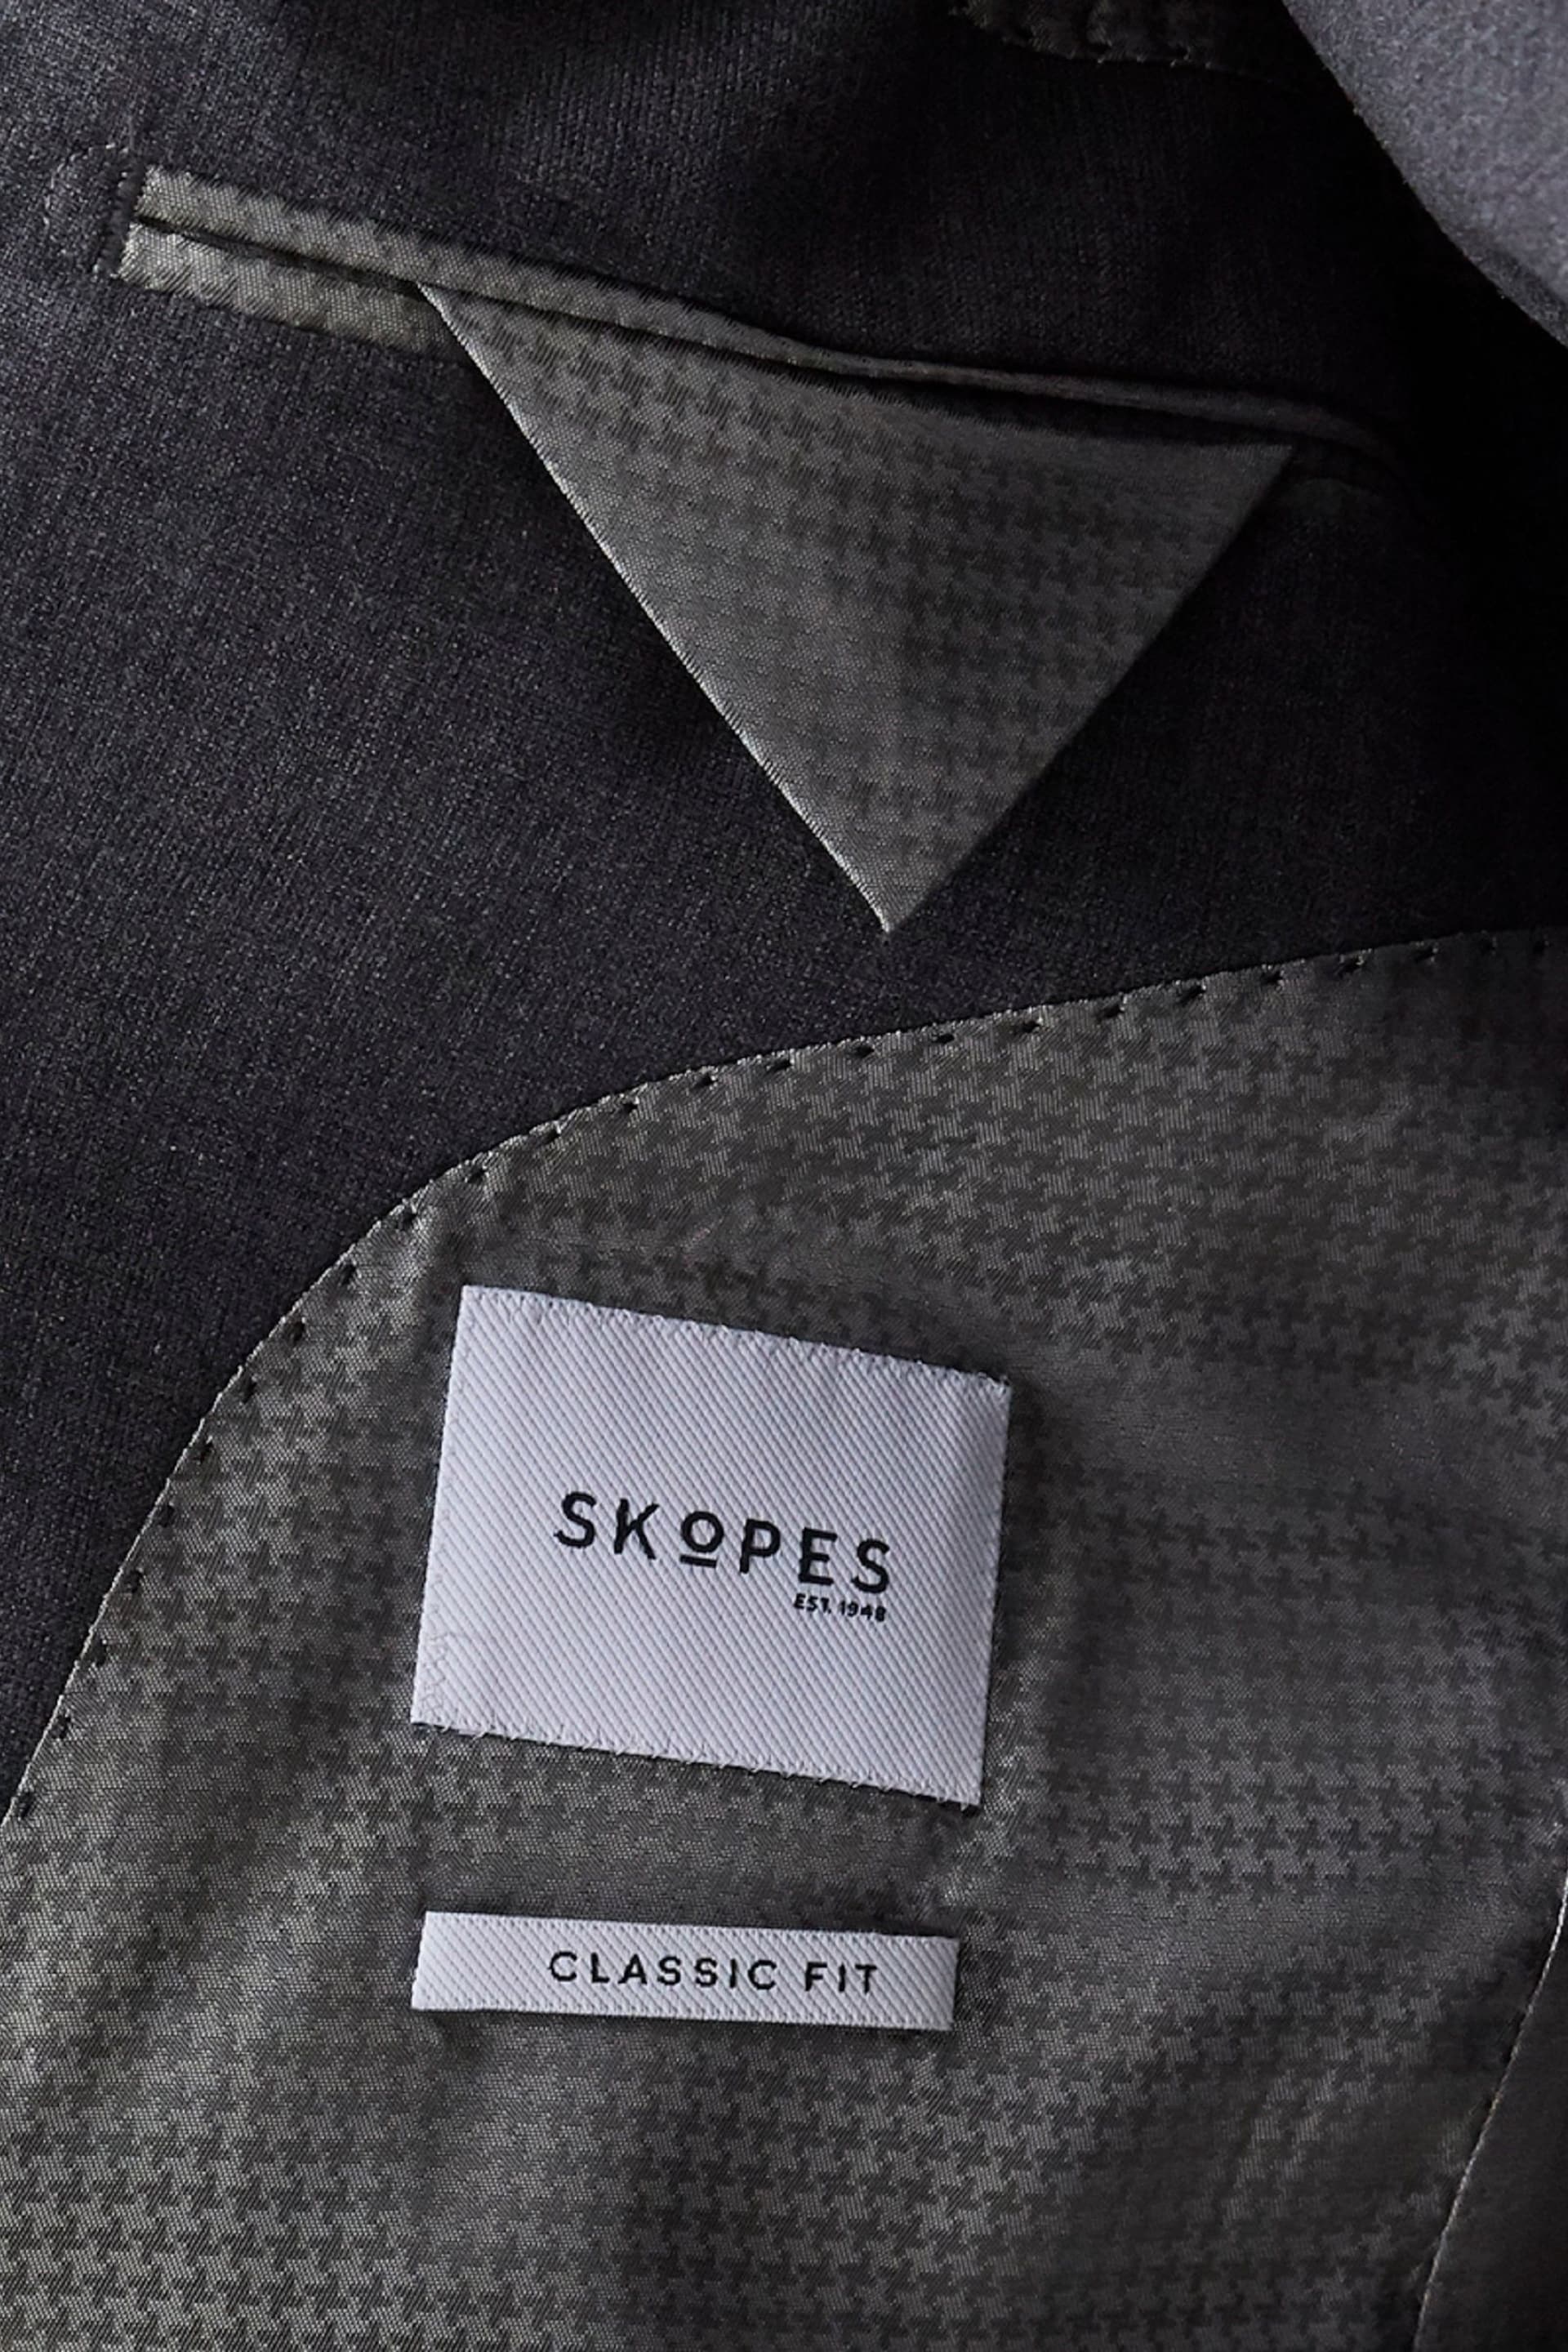 Skopes Darwin Classic Fit Suit Jacket - Image 5 of 5